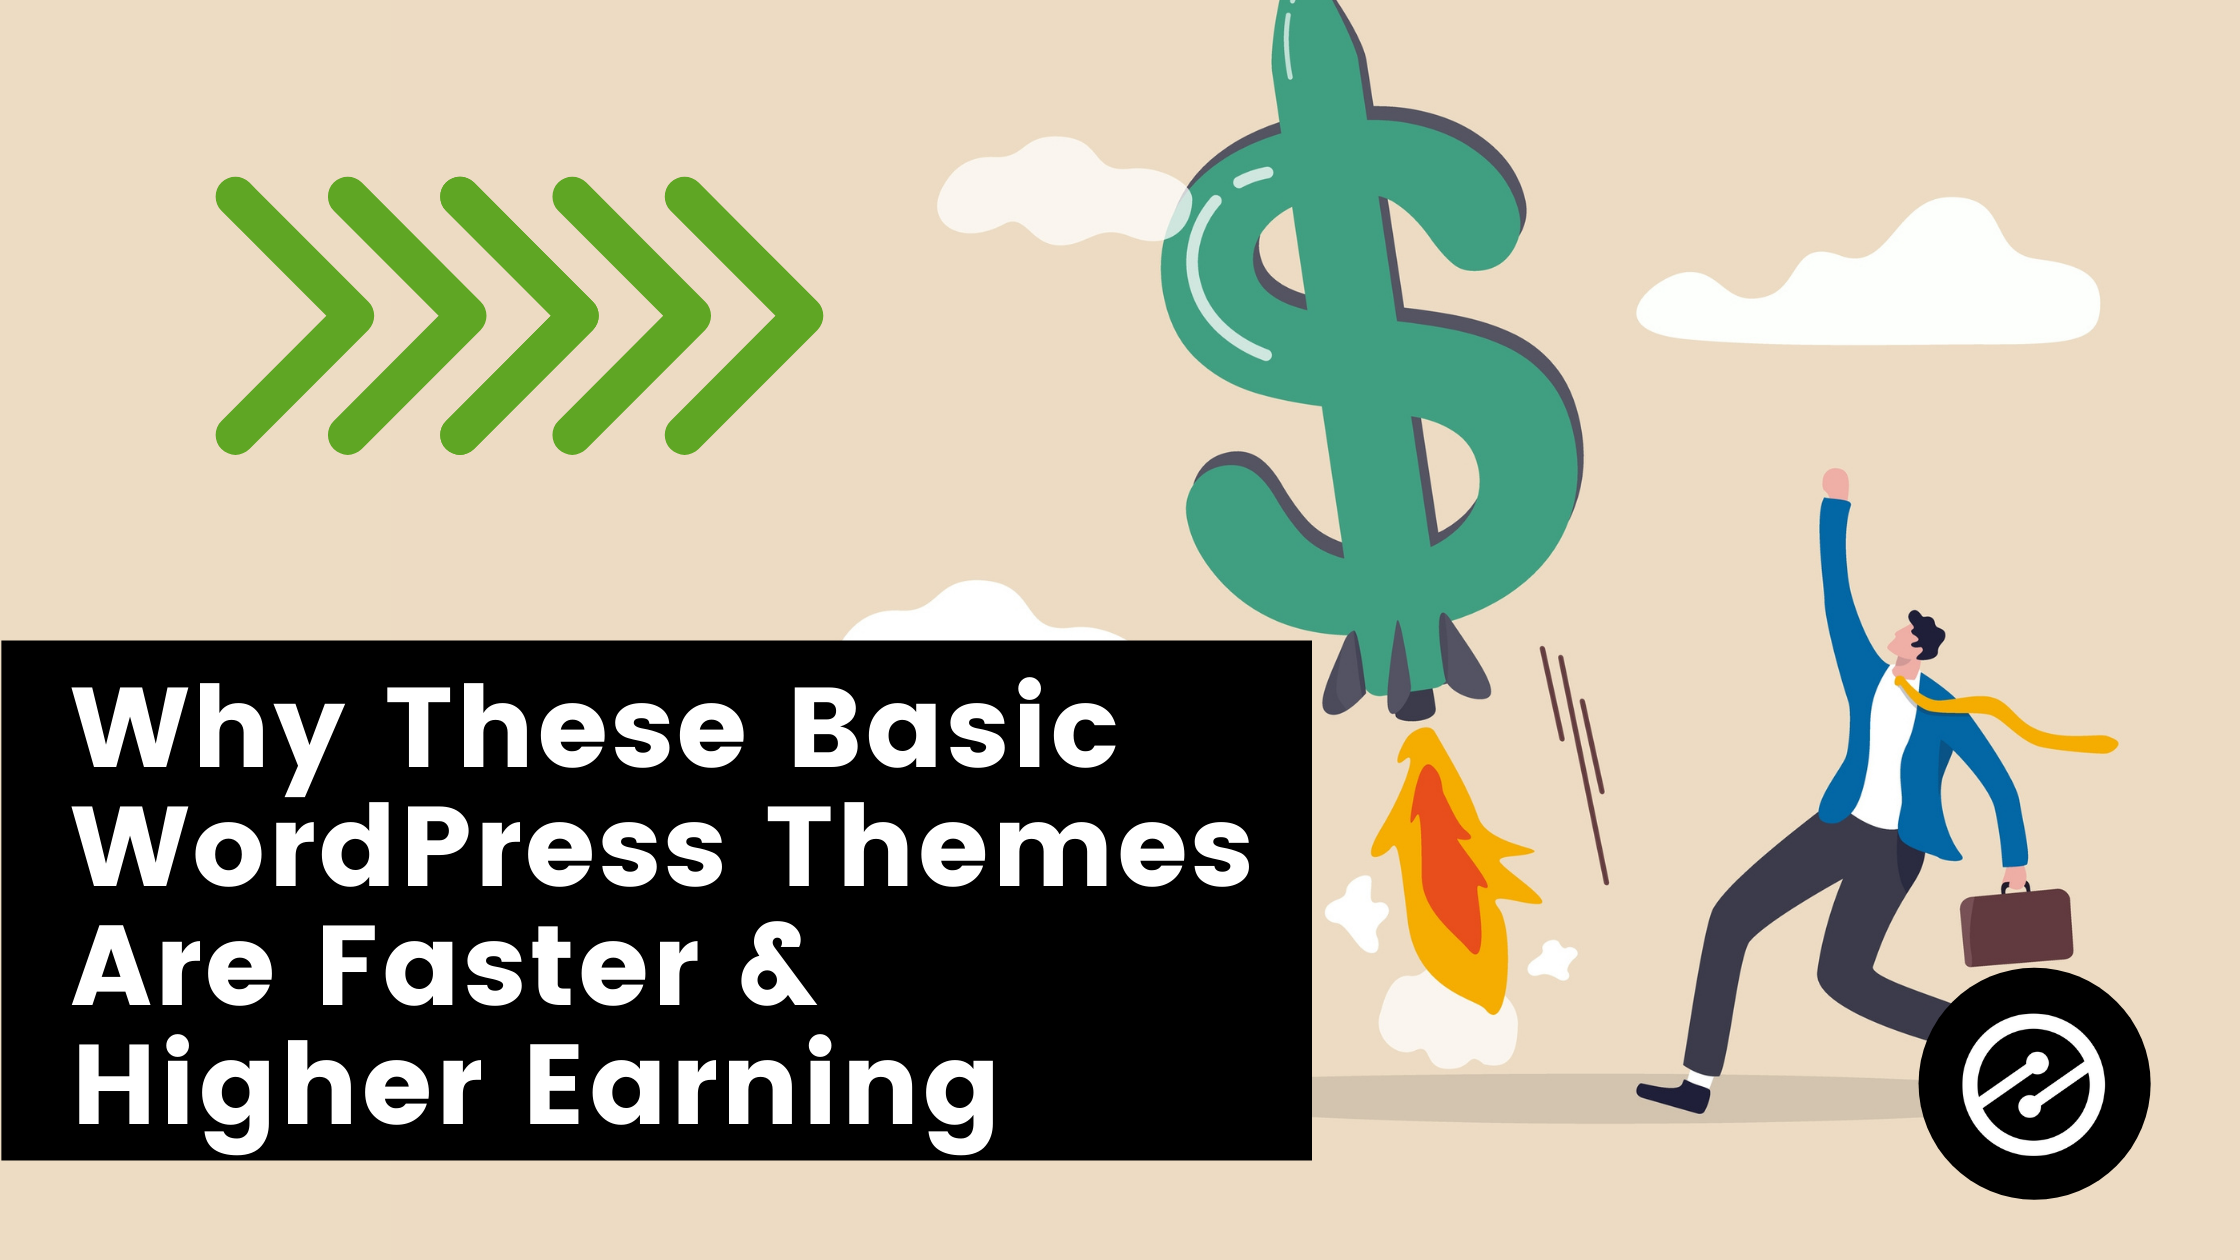 Why These Basic WordPress Themes Are Faster &#038; Higher Earning